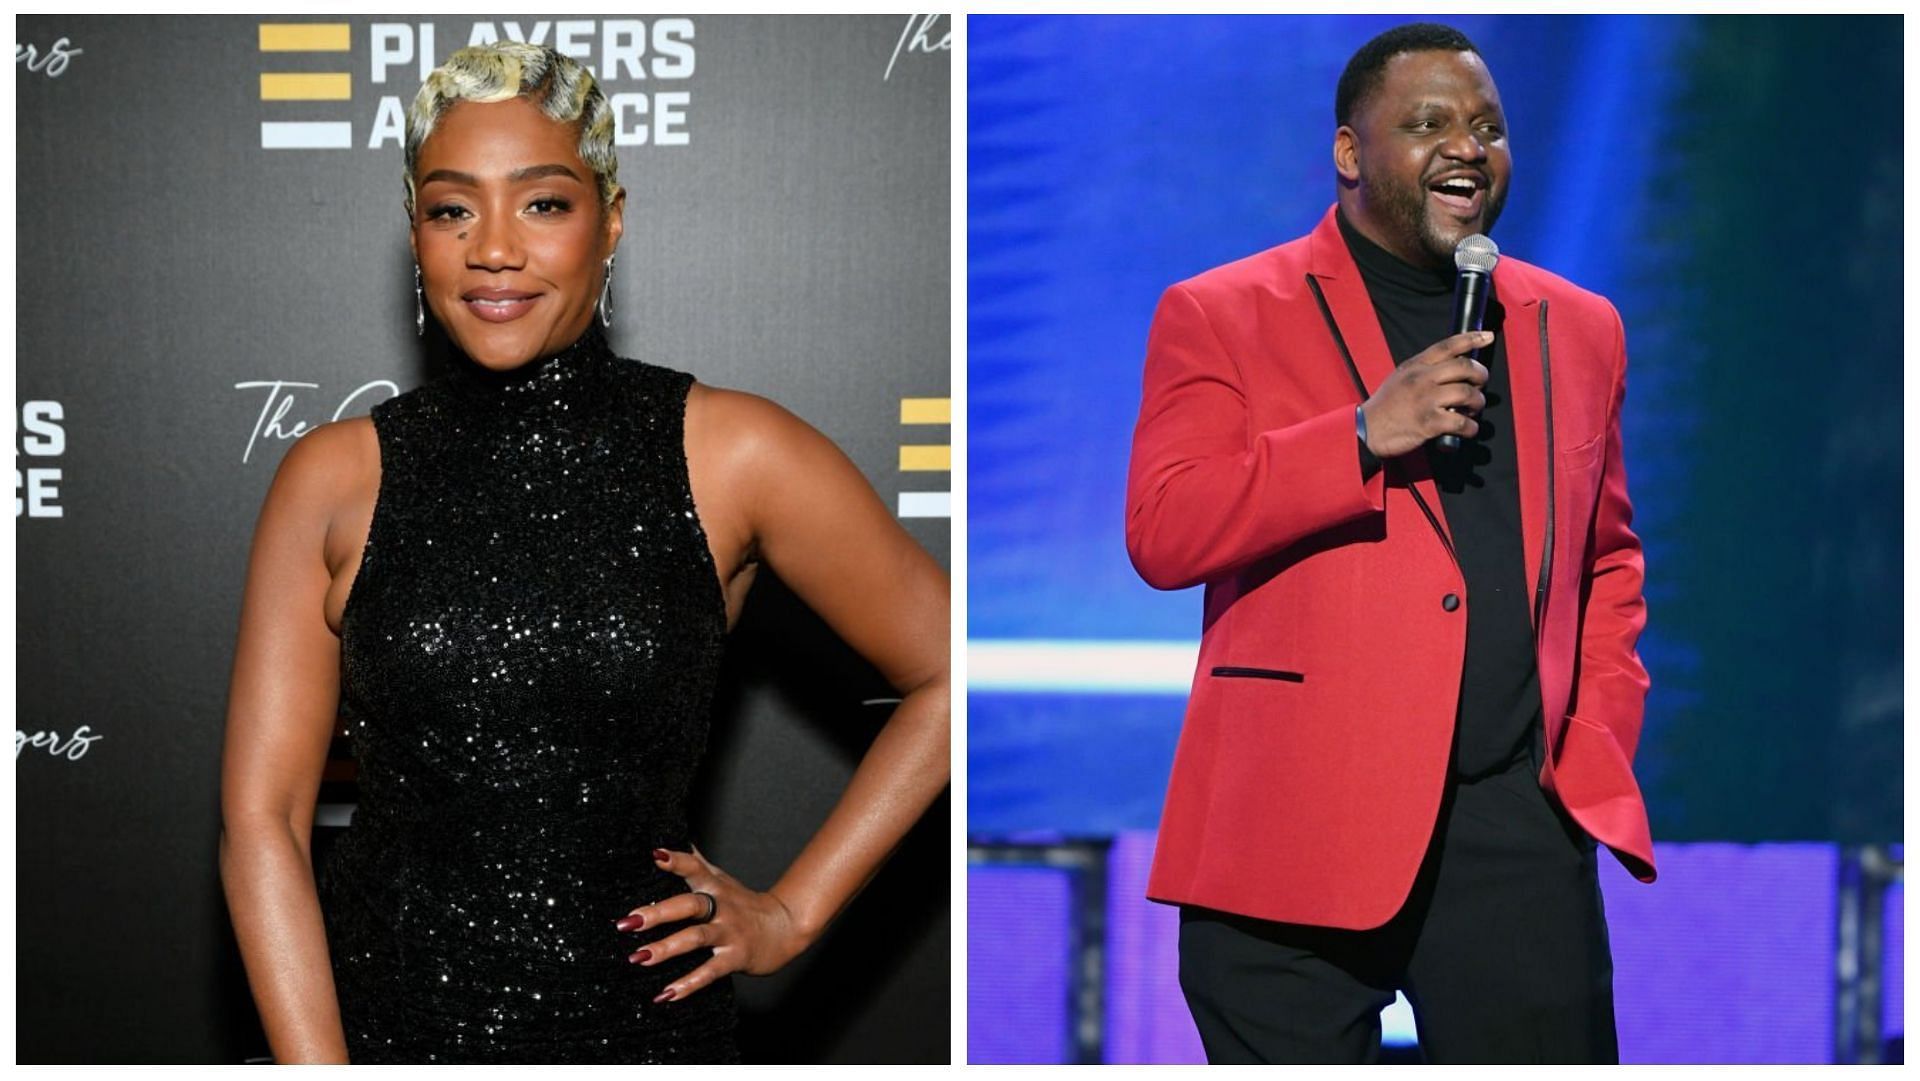 Tiffany Haddish and Aries Spears were accused of molesting a minor (Images via Michael Tullberg and Ethan Miller/Getty Images)